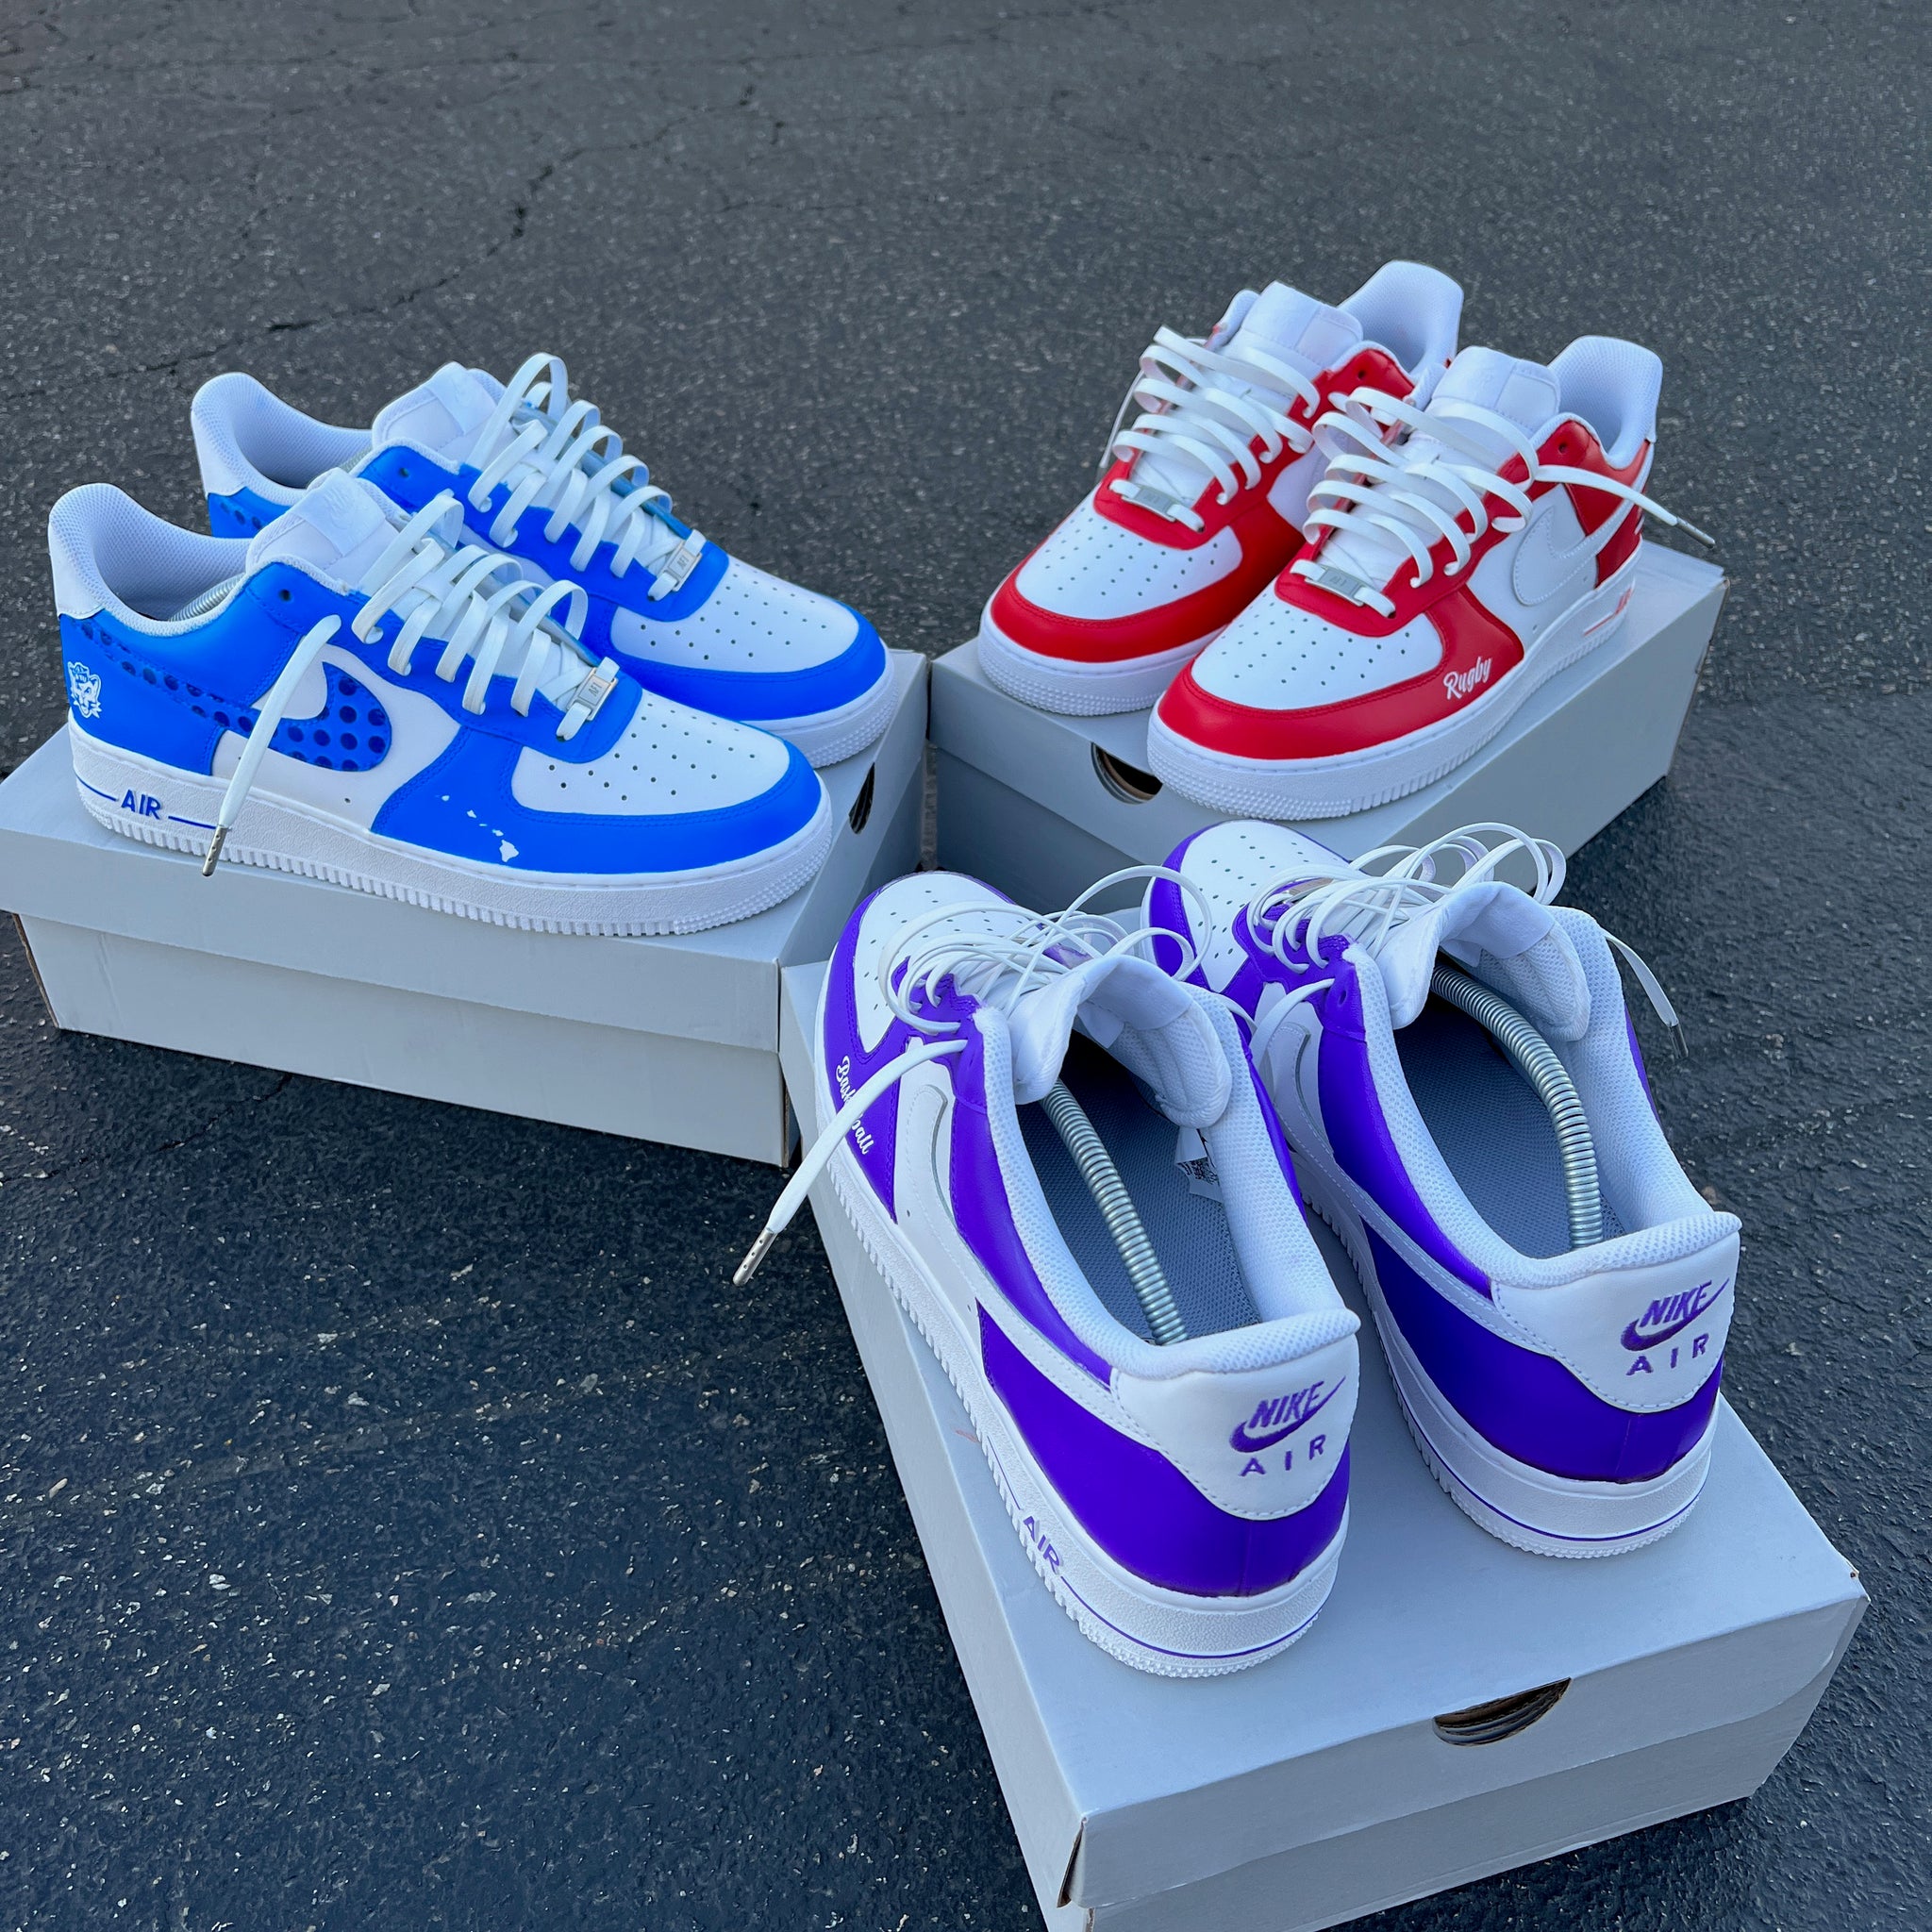 White Nike Af1 lows - 3 pairs - Custom Order - Invoice 2 of 2 – B Street  Shoes